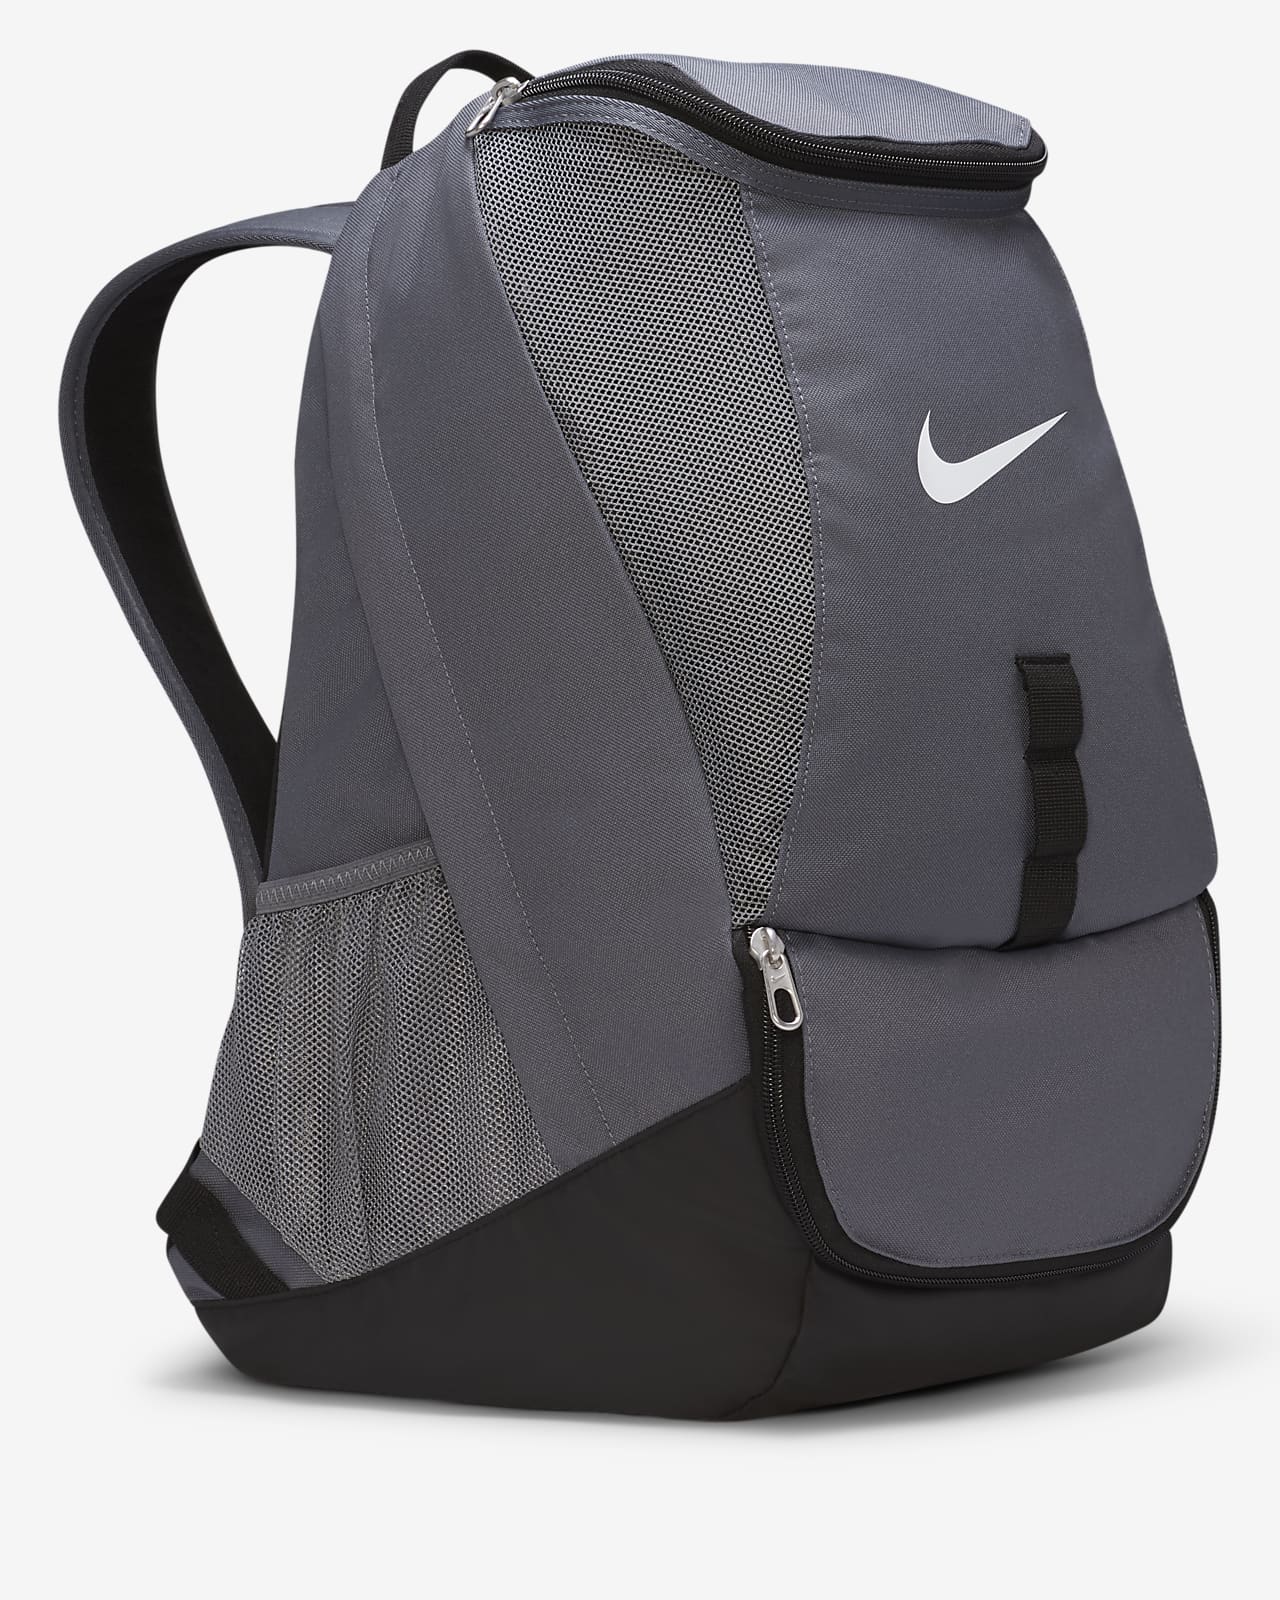 football rucksack with boot compartment